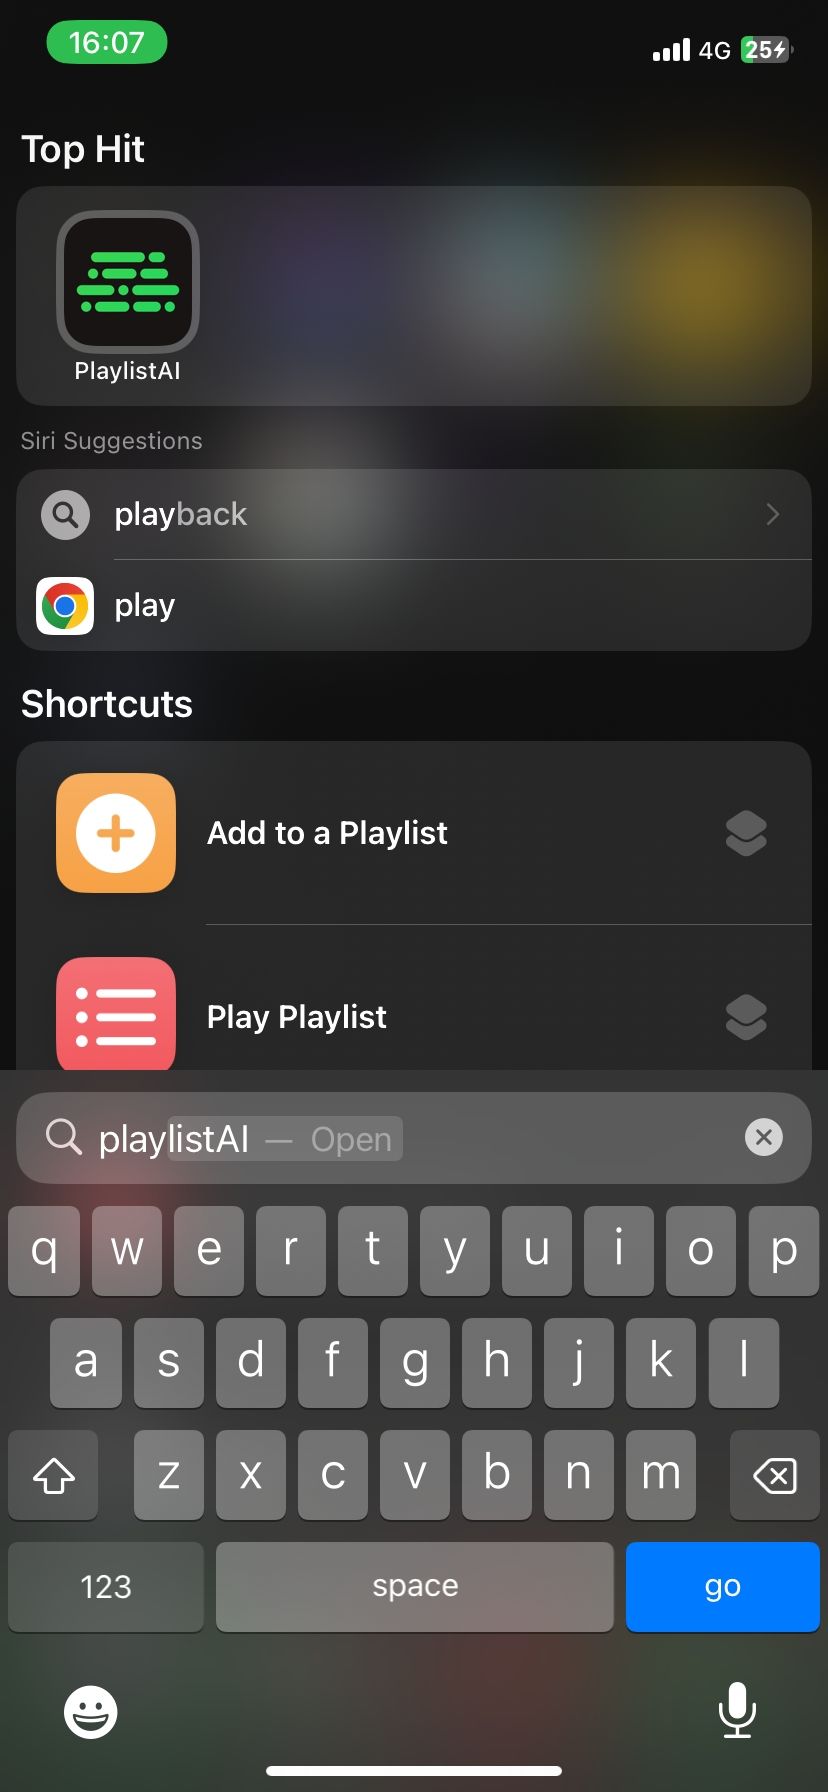 Play Playlist visible via quick search on iOS